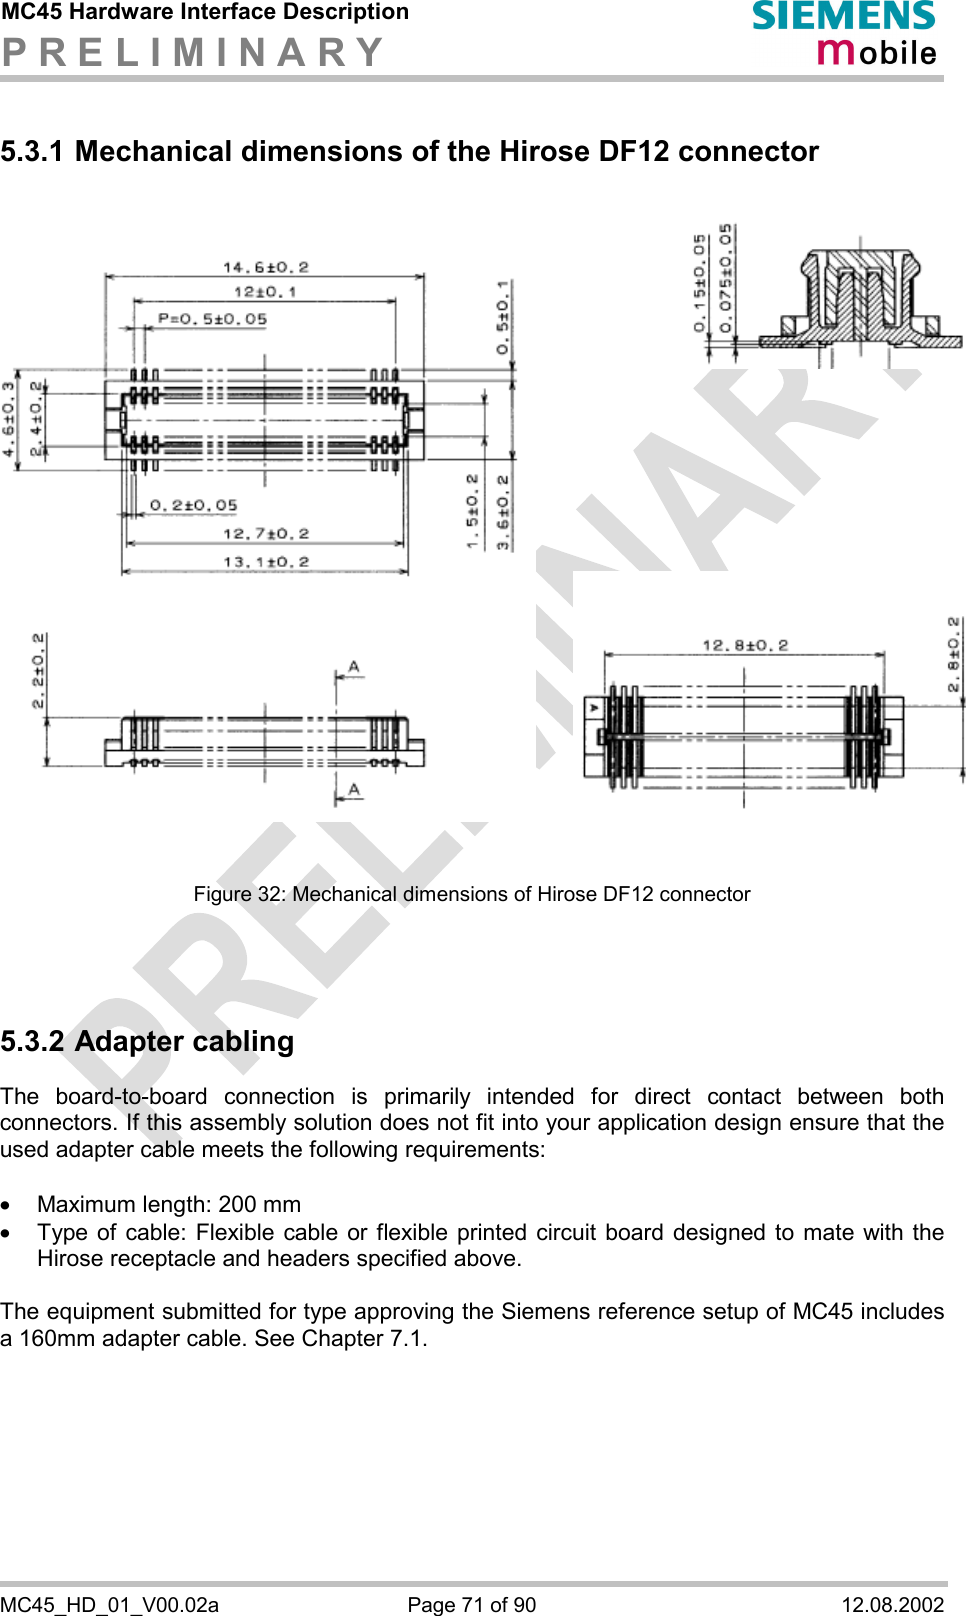 MC45 Hardware Interface Description P R E L I M I N A R Y      MC45_HD_01_V00.02a  Page 71 of 90  12.08.2002 5.3.1 Mechanical dimensions of the Hirose DF12 connector                 Figure 32: Mechanical dimensions of Hirose DF12 connector    5.3.2 Adapter cabling The board-to-board connection is primarily intended for direct contact between both connectors. If this assembly solution does not fit into your application design ensure that the used adapter cable meets the following requirements:  ·  Maximum length: 200 mm ·  Type of cable: Flexible cable or flexible printed circuit board designed to mate with the Hirose receptacle and headers specified above.   The equipment submitted for type approving the Siemens reference setup of MC45 includes a 160mm adapter cable. See Chapter 7.1. 